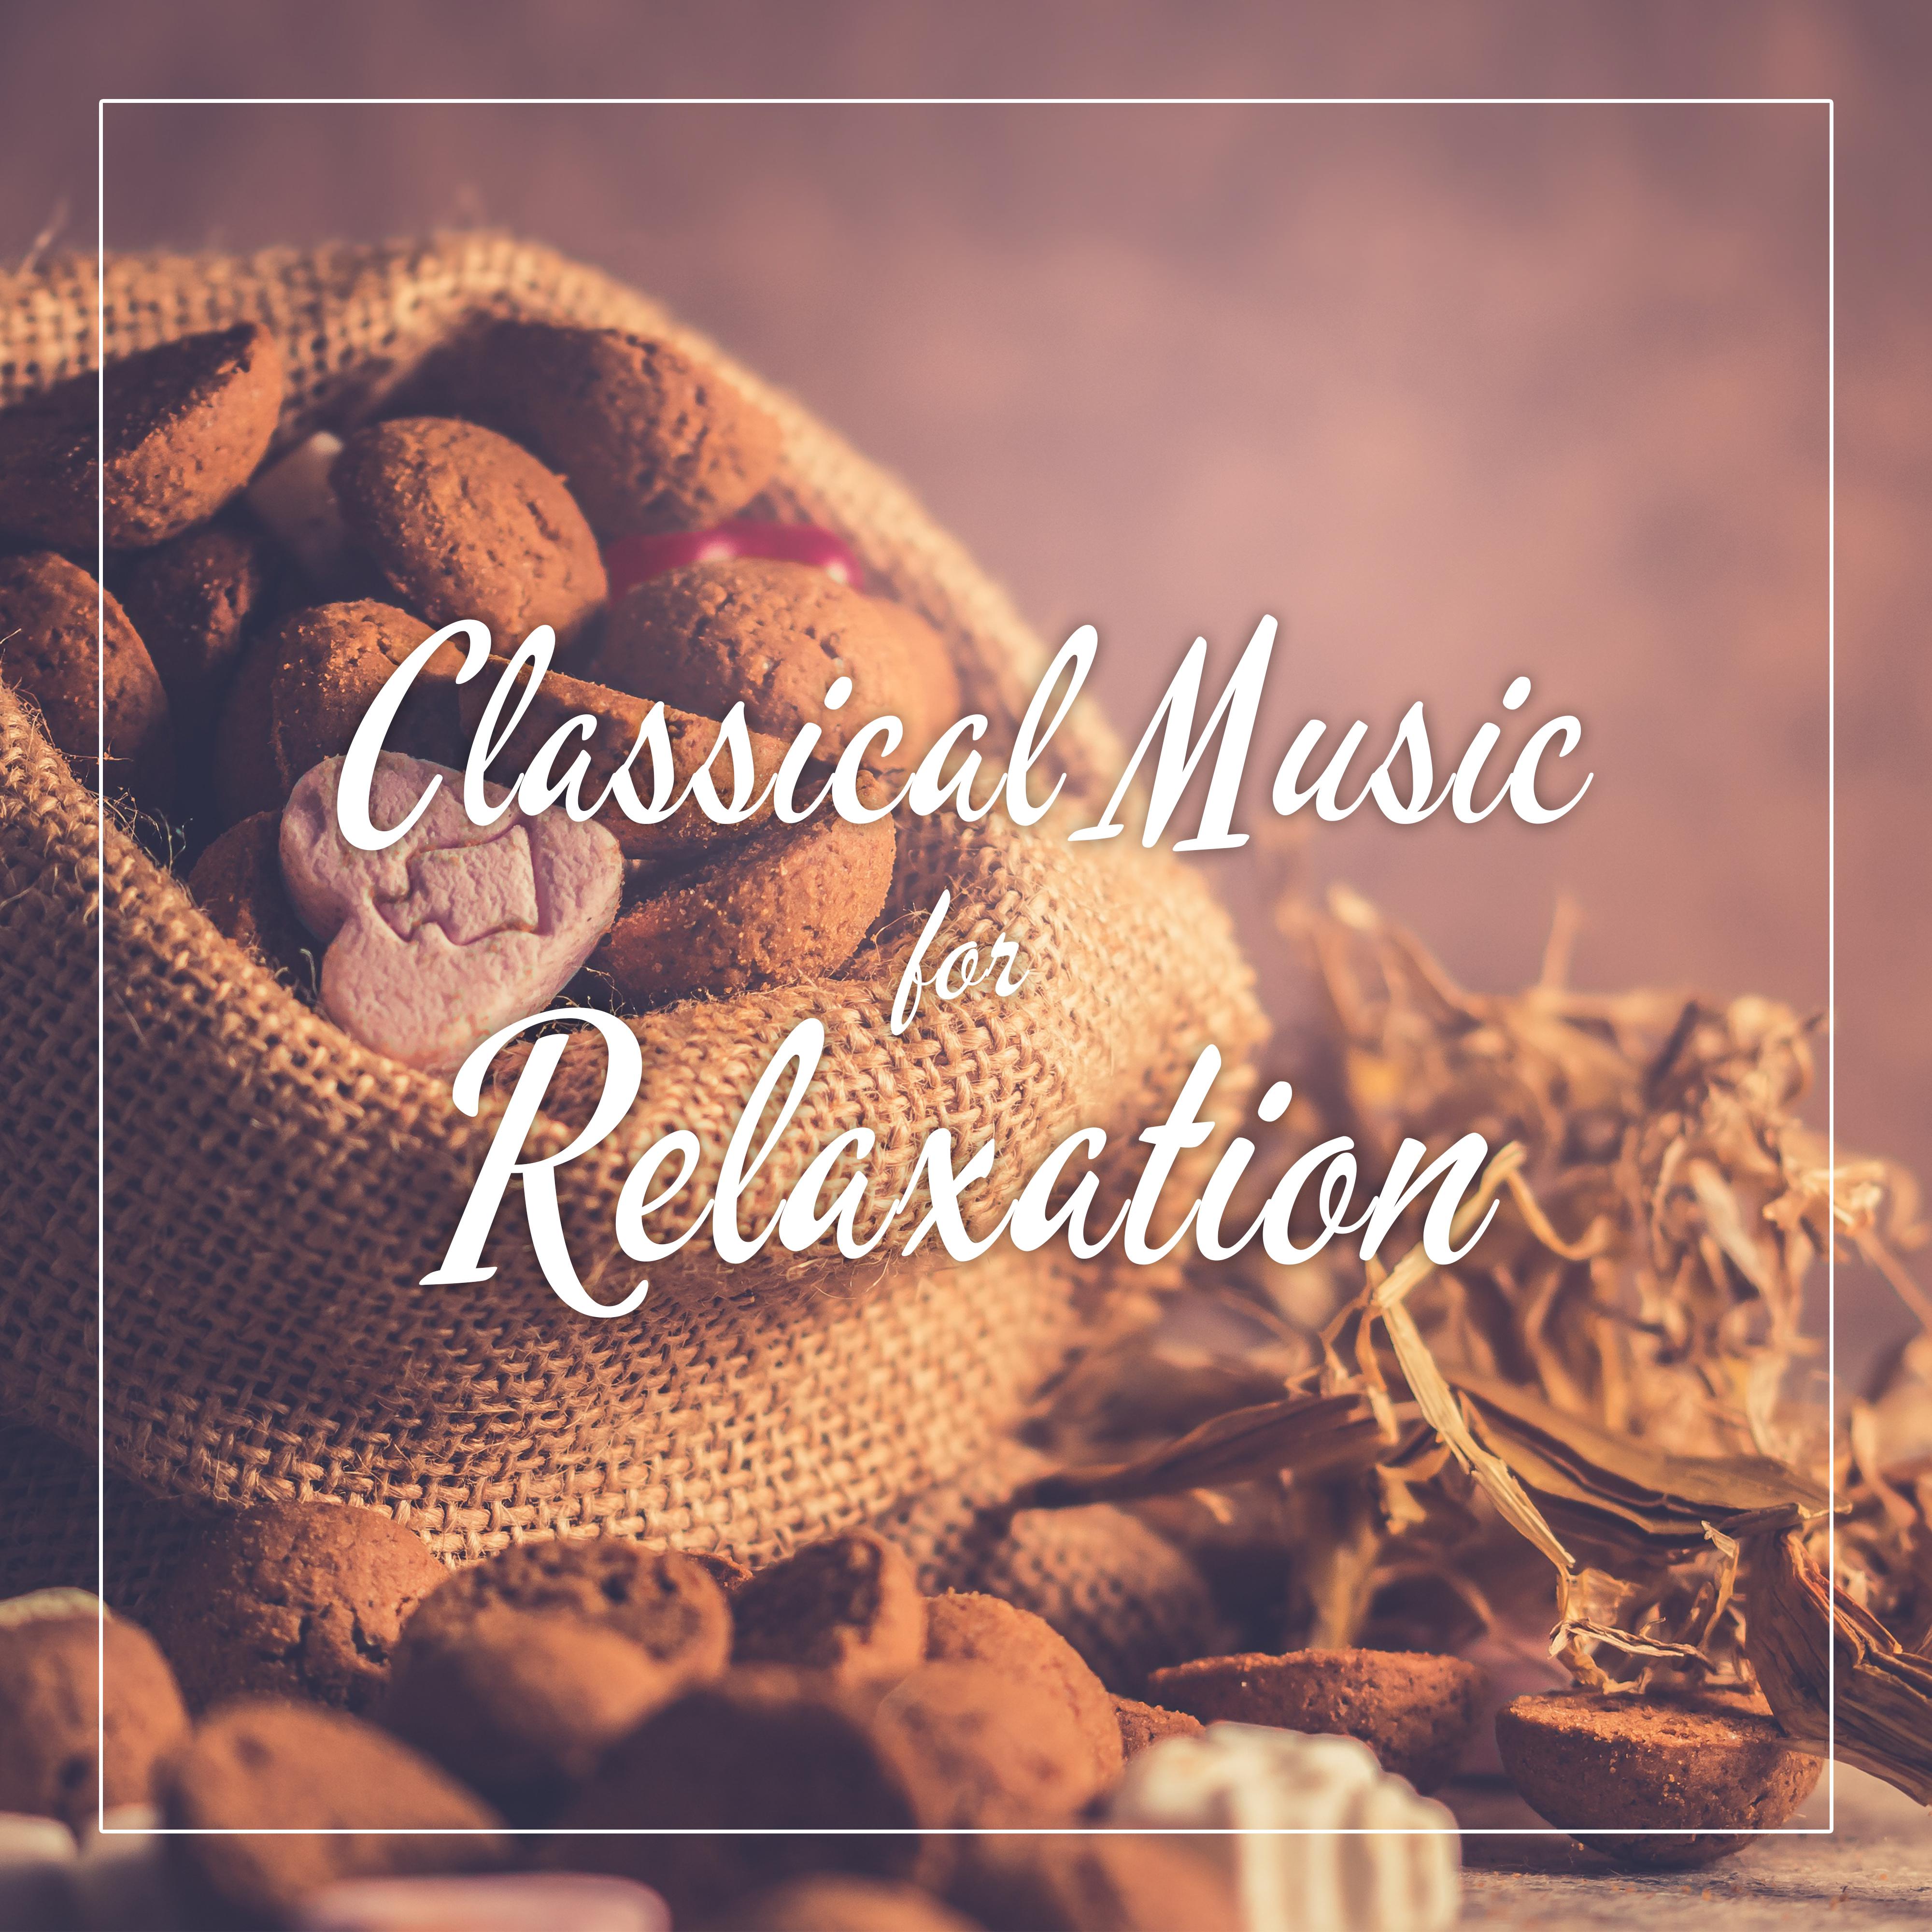 Piano Jazz to Relax  Rest with Jazz Music, Relaxation Sounds to Calm Mind, Smooth Waves